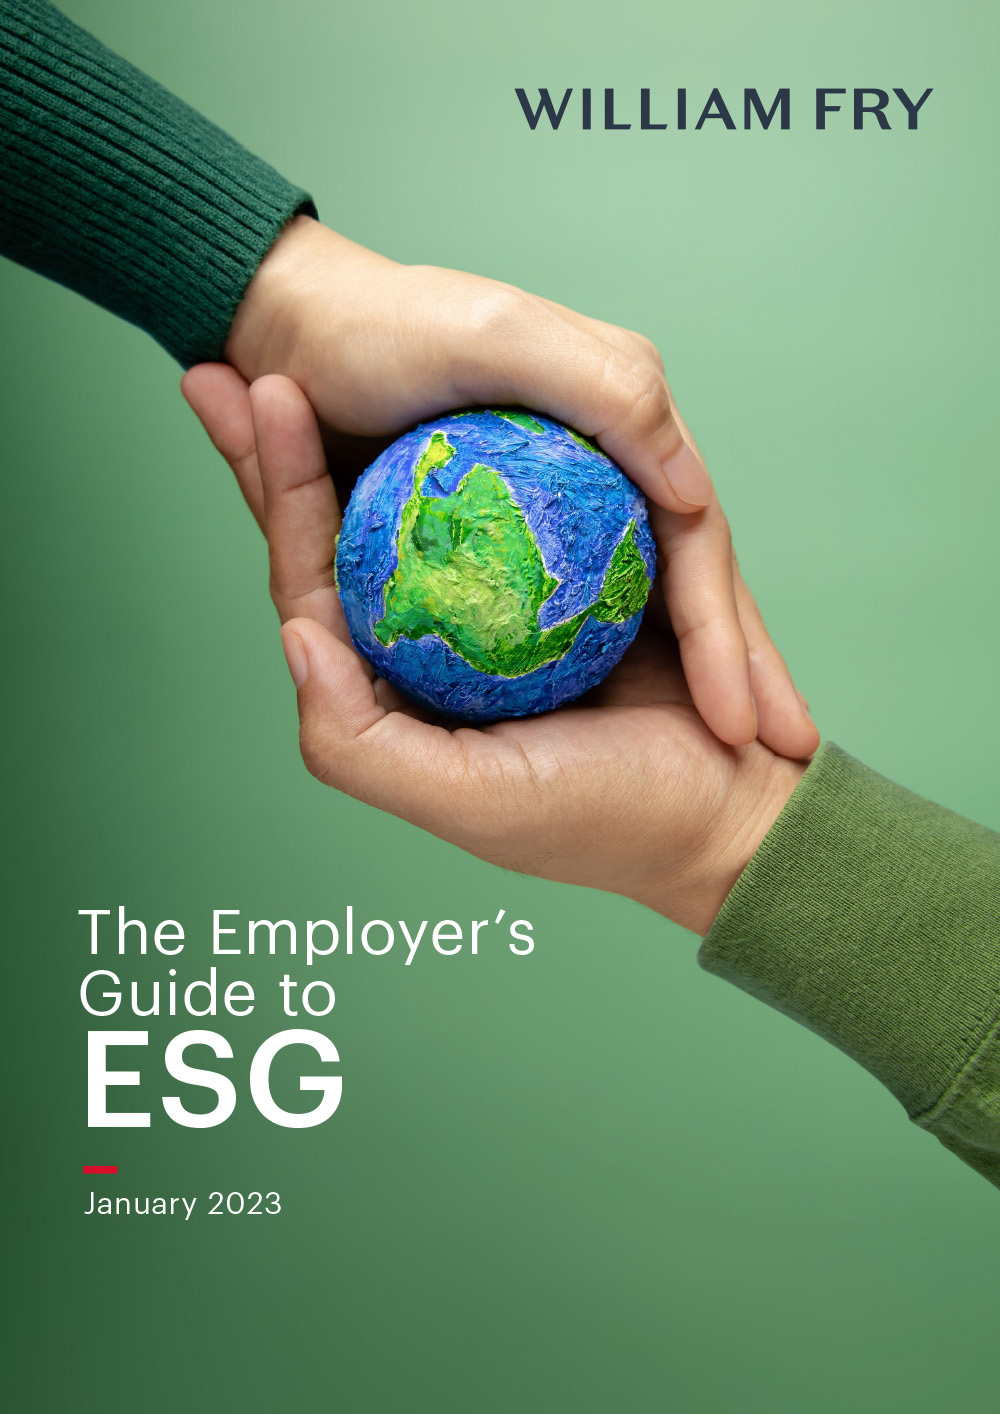 William Fry: Less than fifth of employers understand ESG obligations